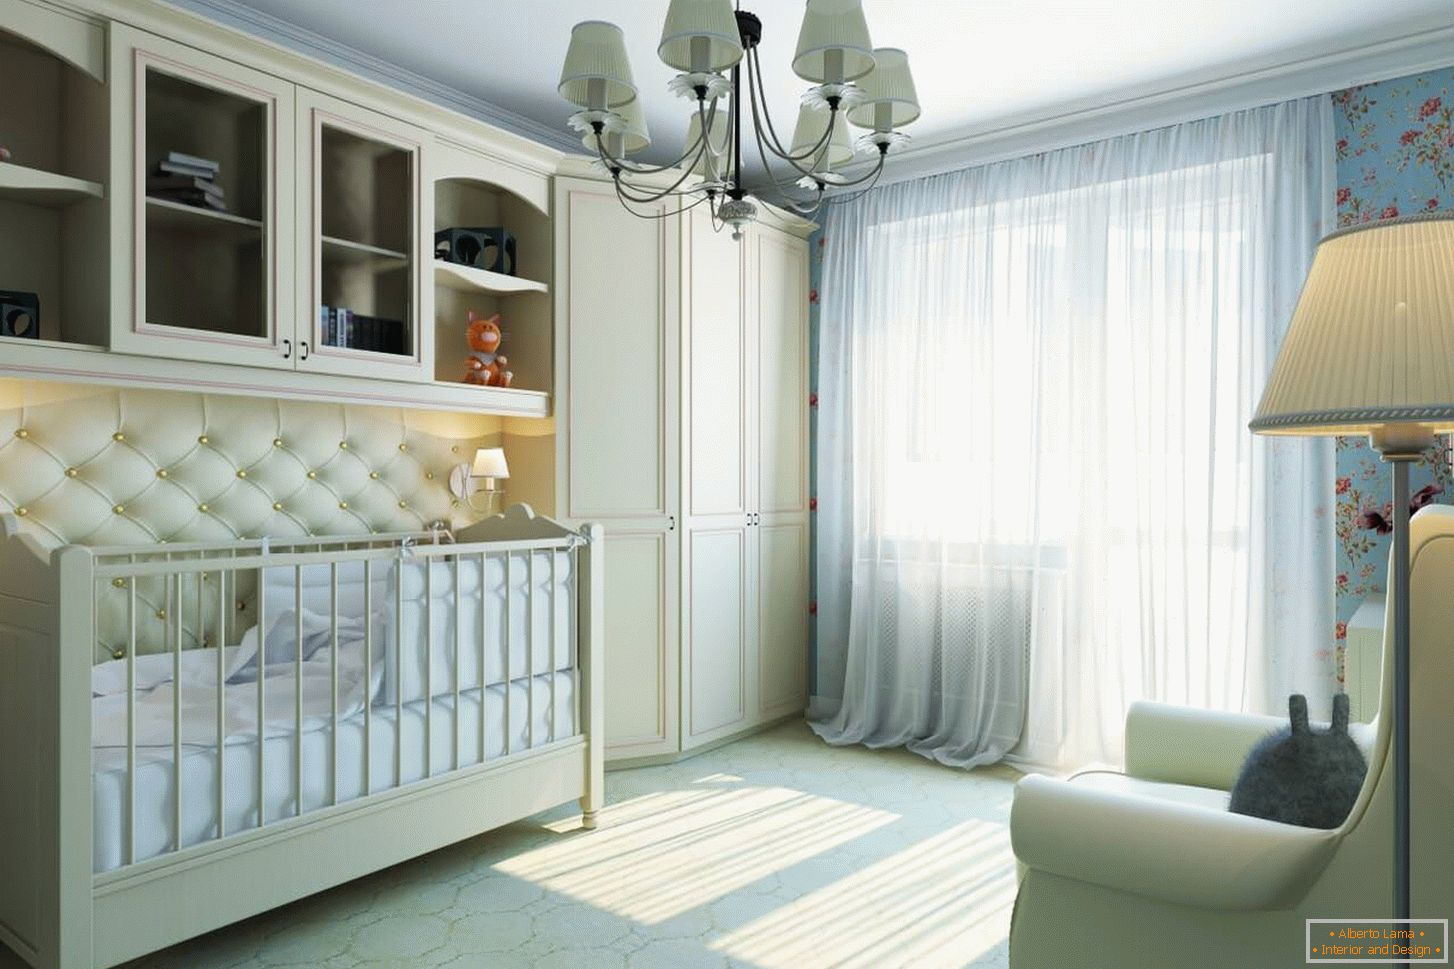 Room for the newborn 12 кв м